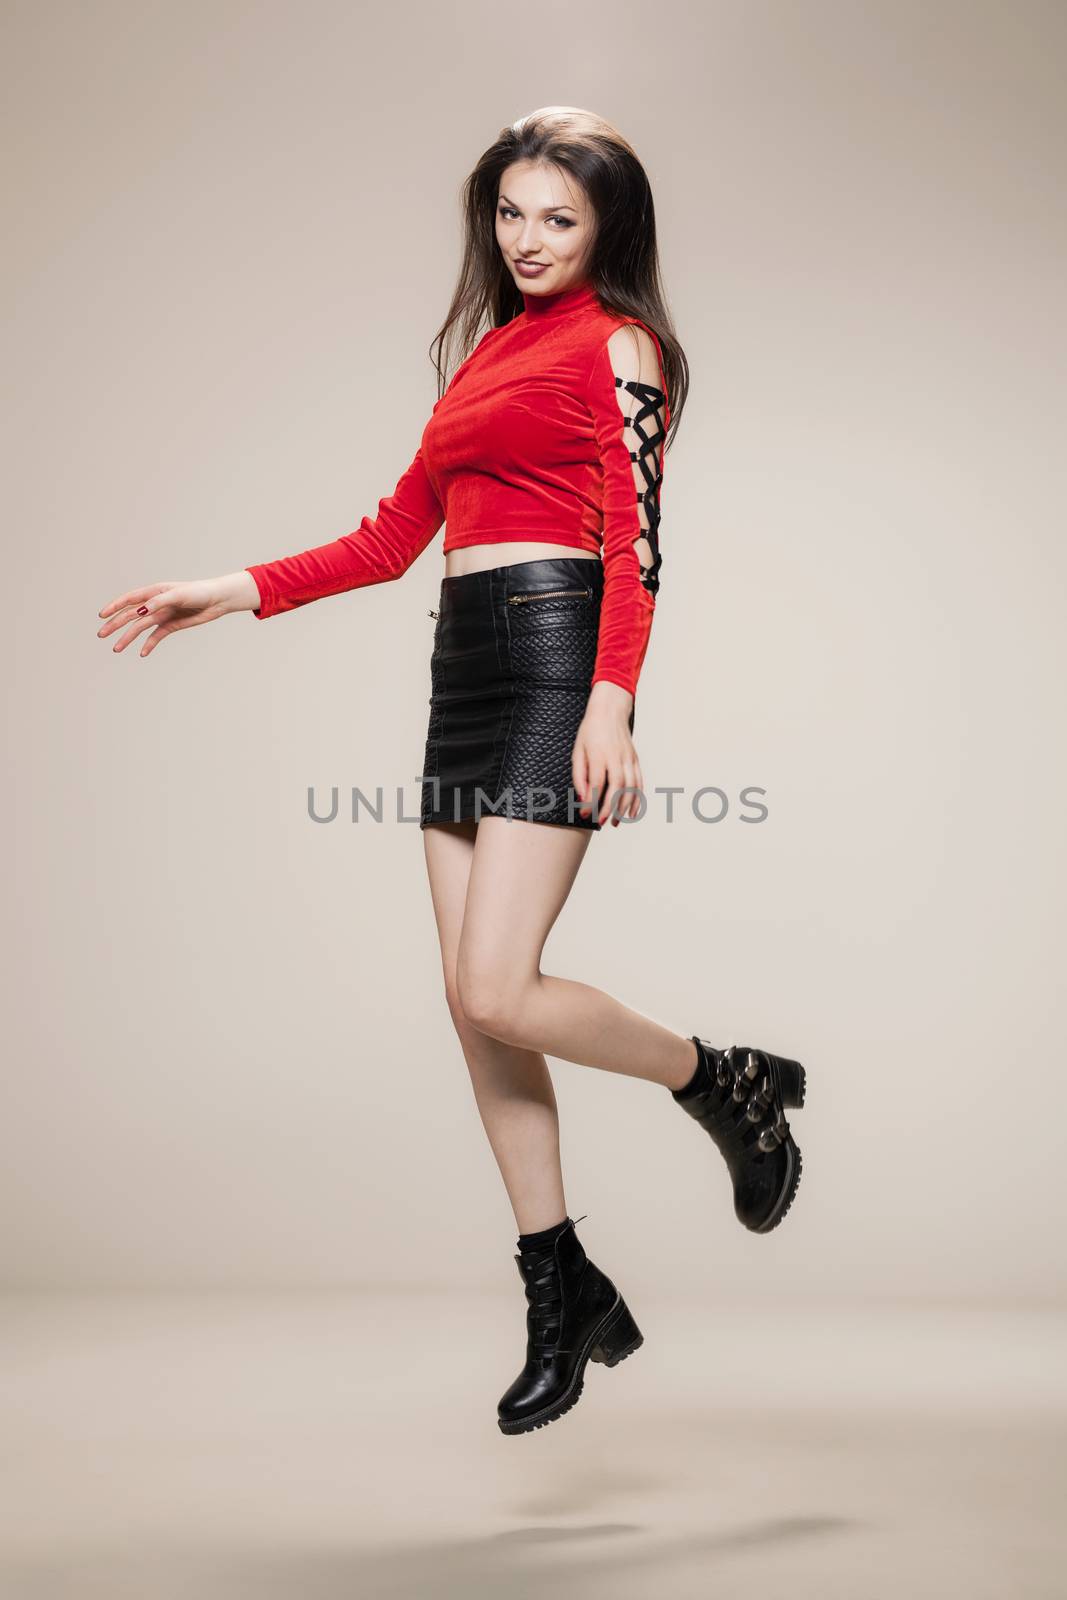 jumping girl in red shirt, short black dress and boots